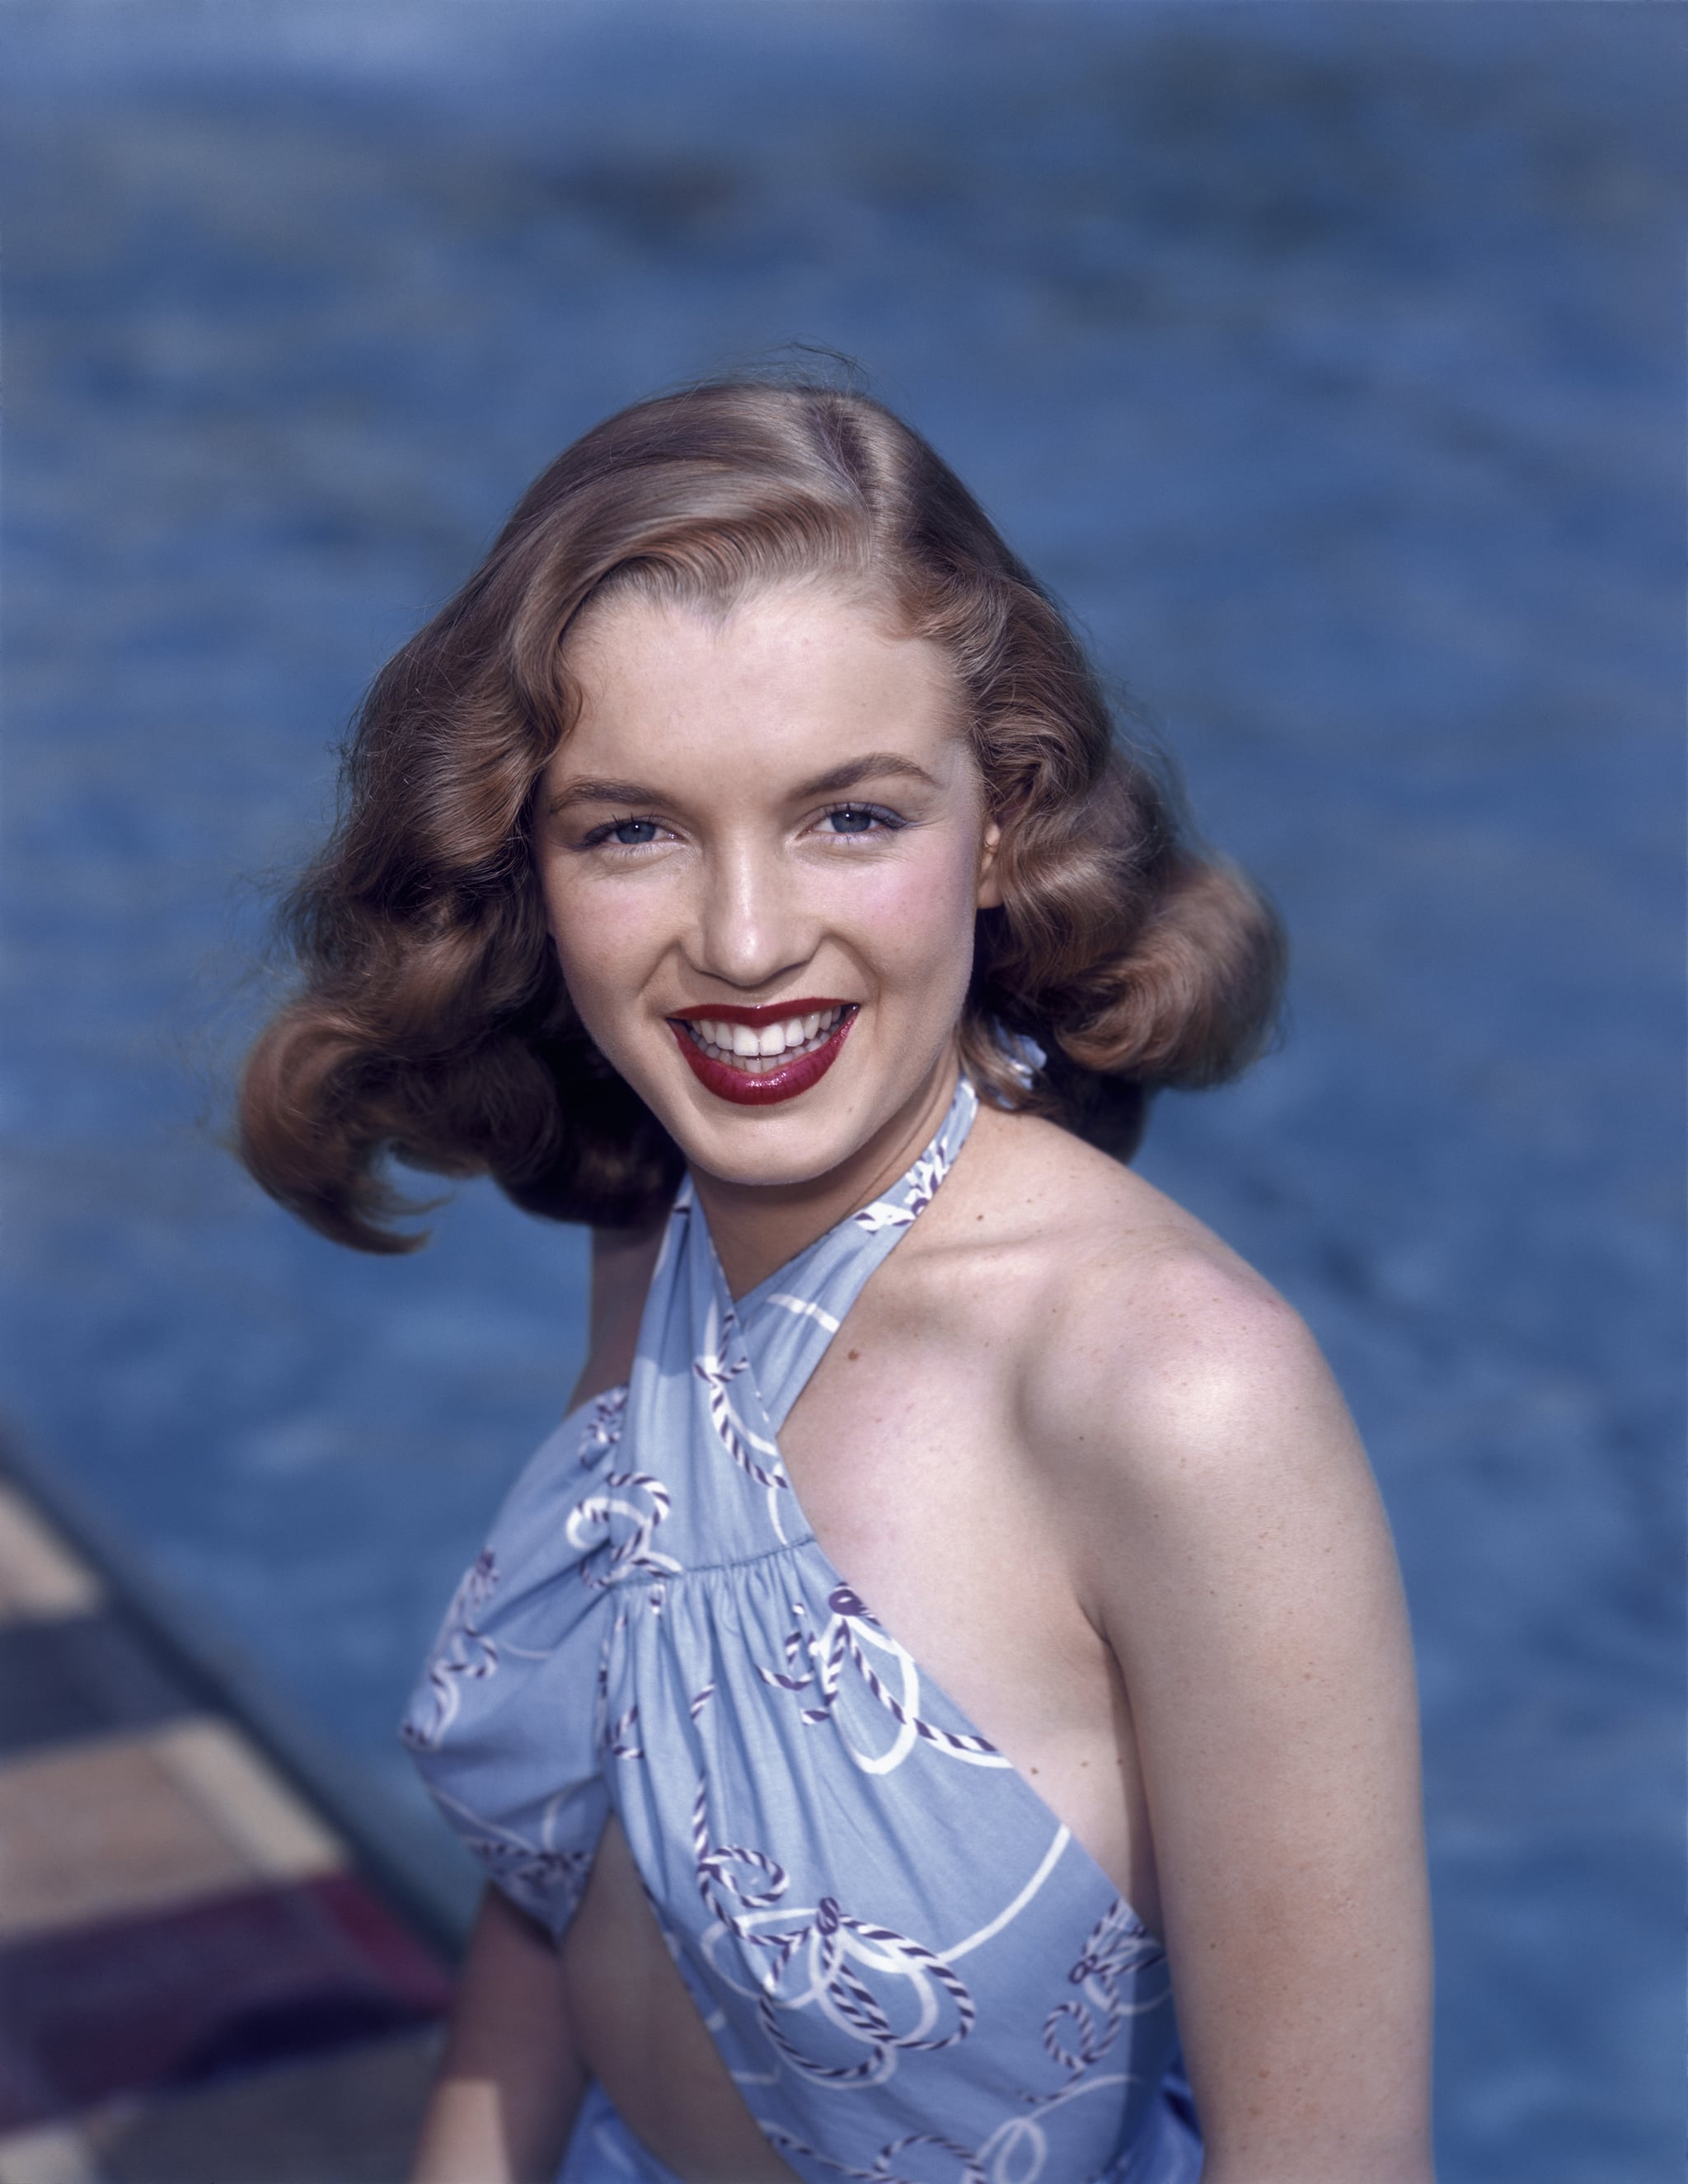 LOS ANGELES - 1946:  Actress Marilyn Monroe then known as Norma Jeane Mortenson poses for a portrait in 1946 in Los Angeles, California.  (Photo by Richard C. Miller/Donaldson Collection/Getty Images)